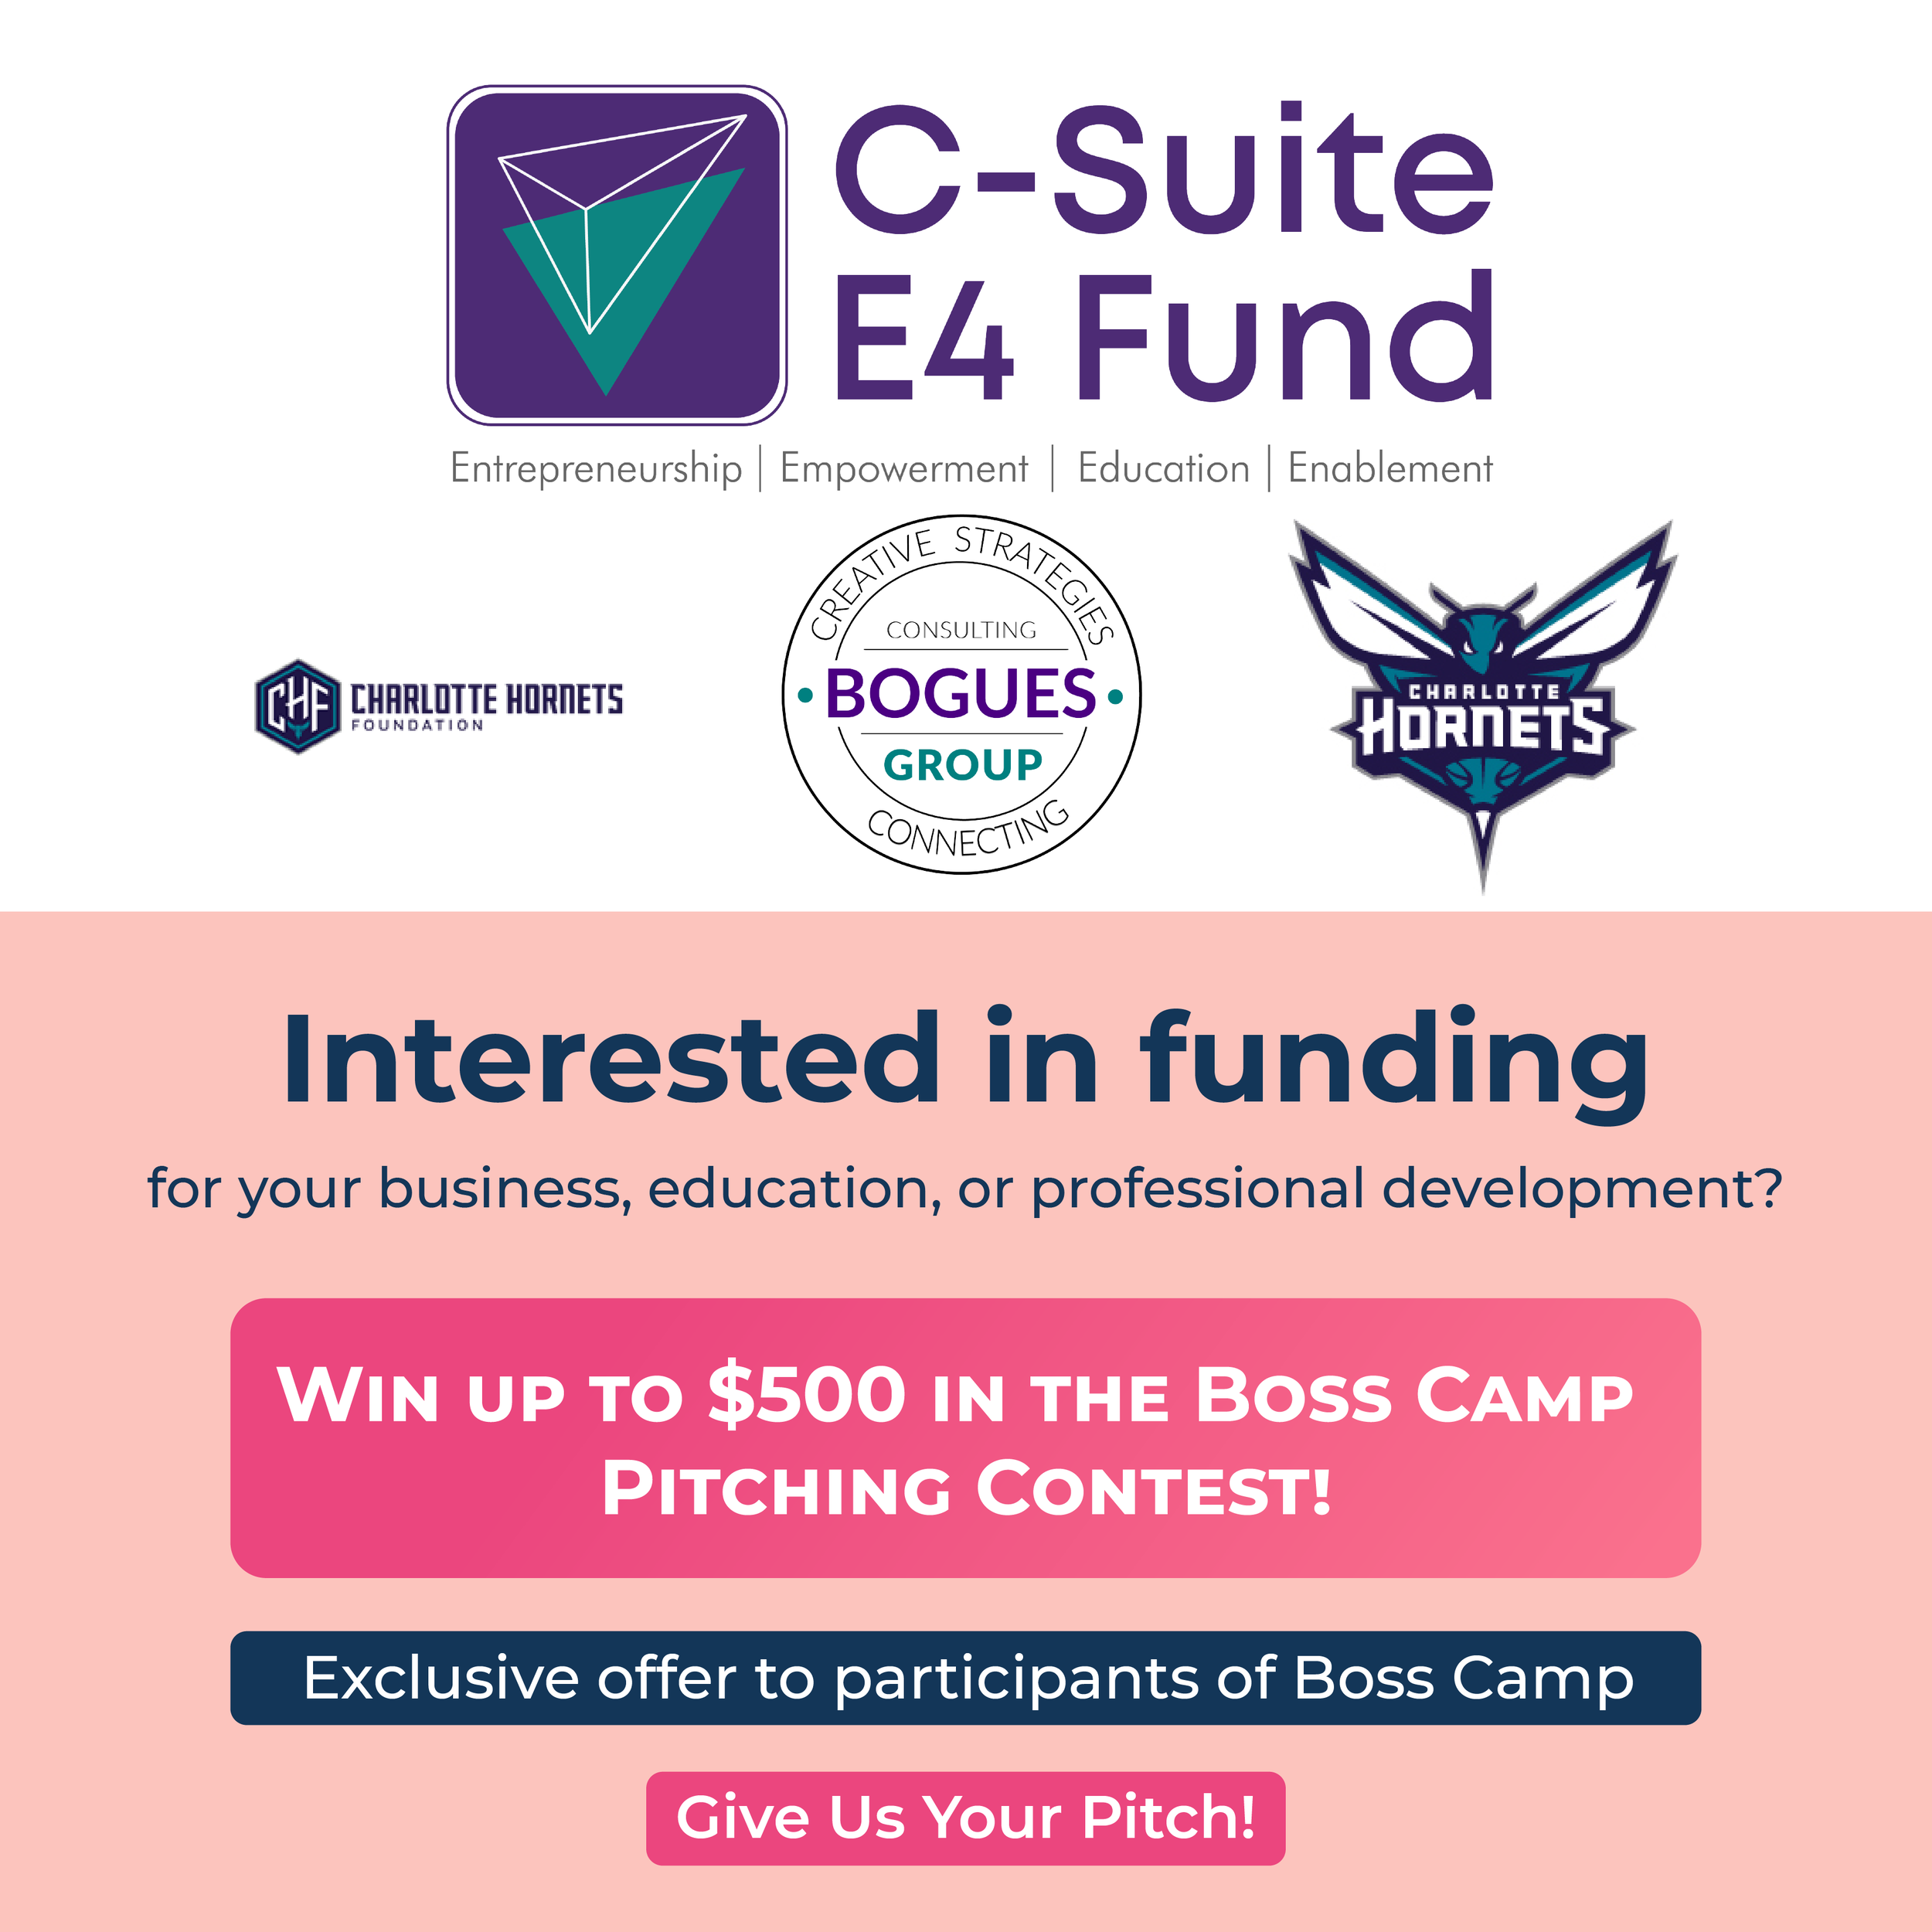 boguesgroup-pitching contest-db-1200x1200px-22march2021-v1-01.png